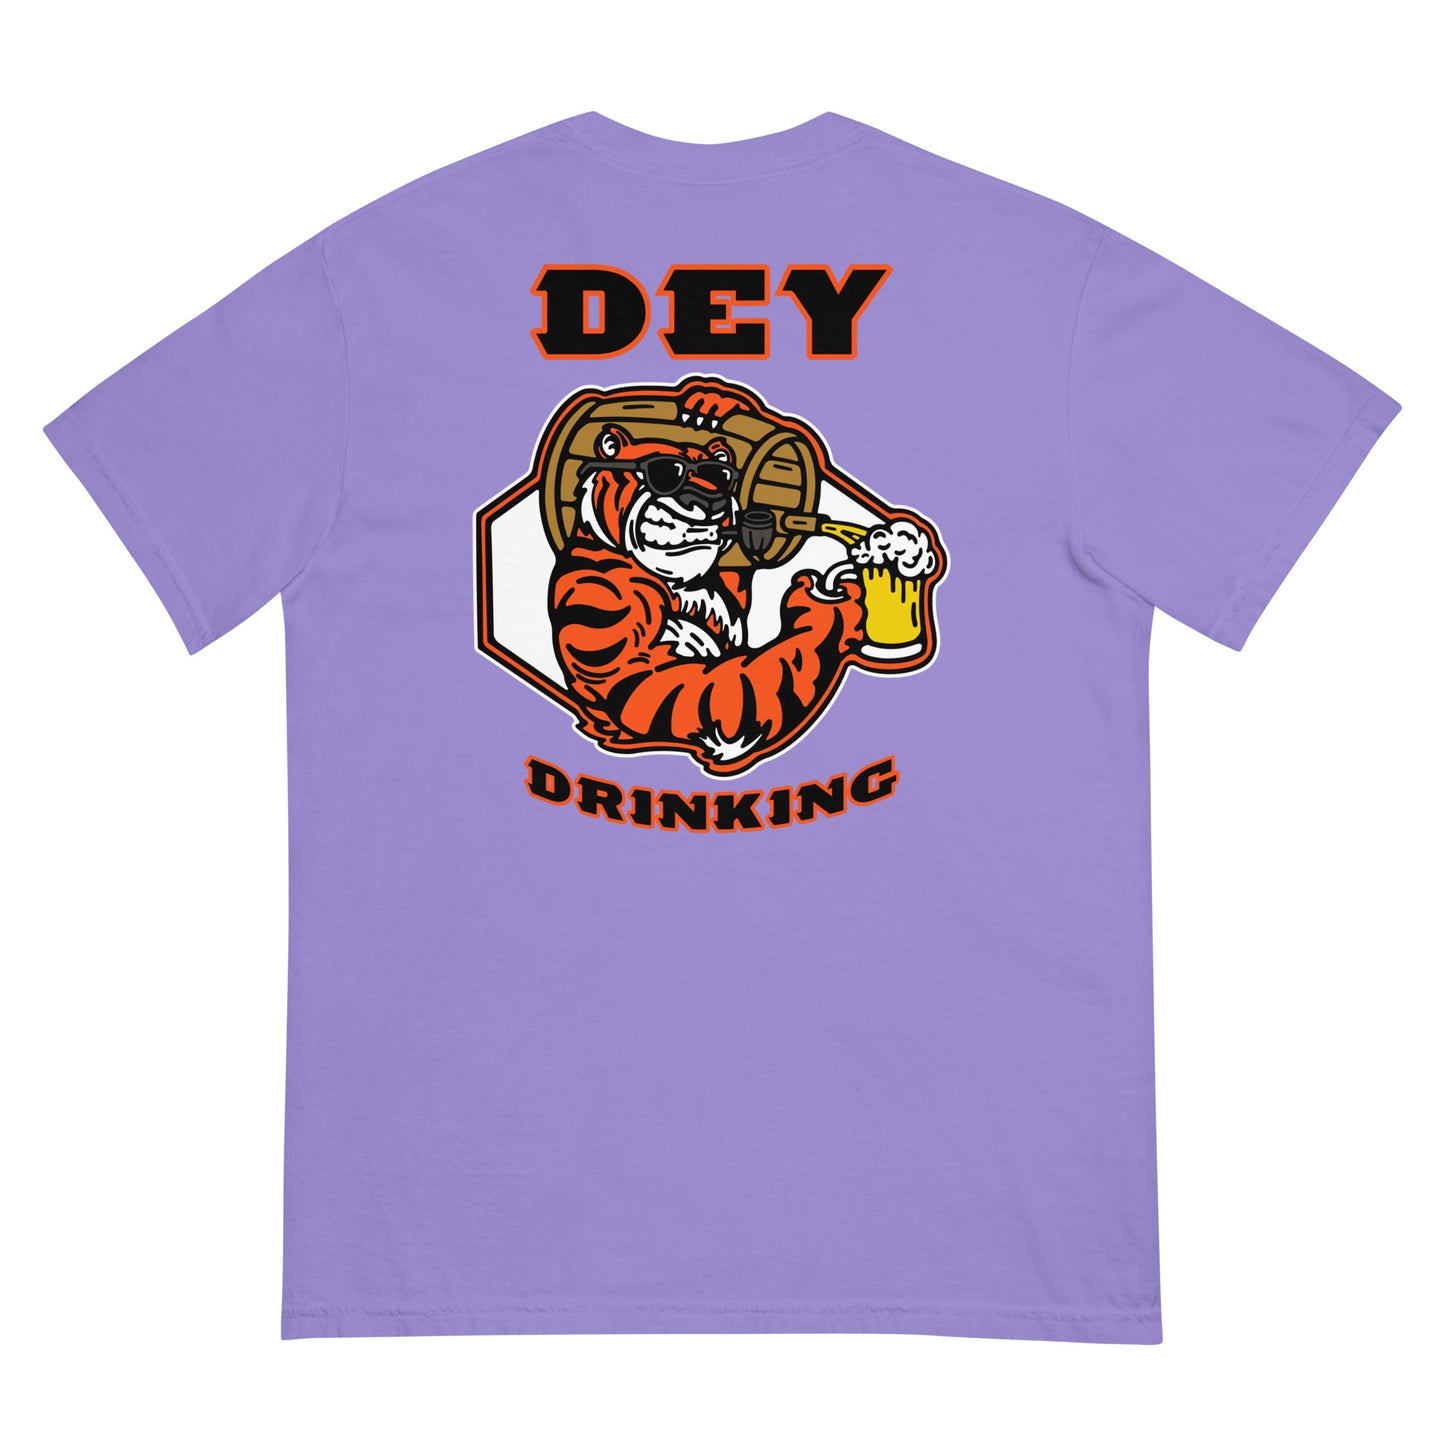 DEY Drinking (front / back)